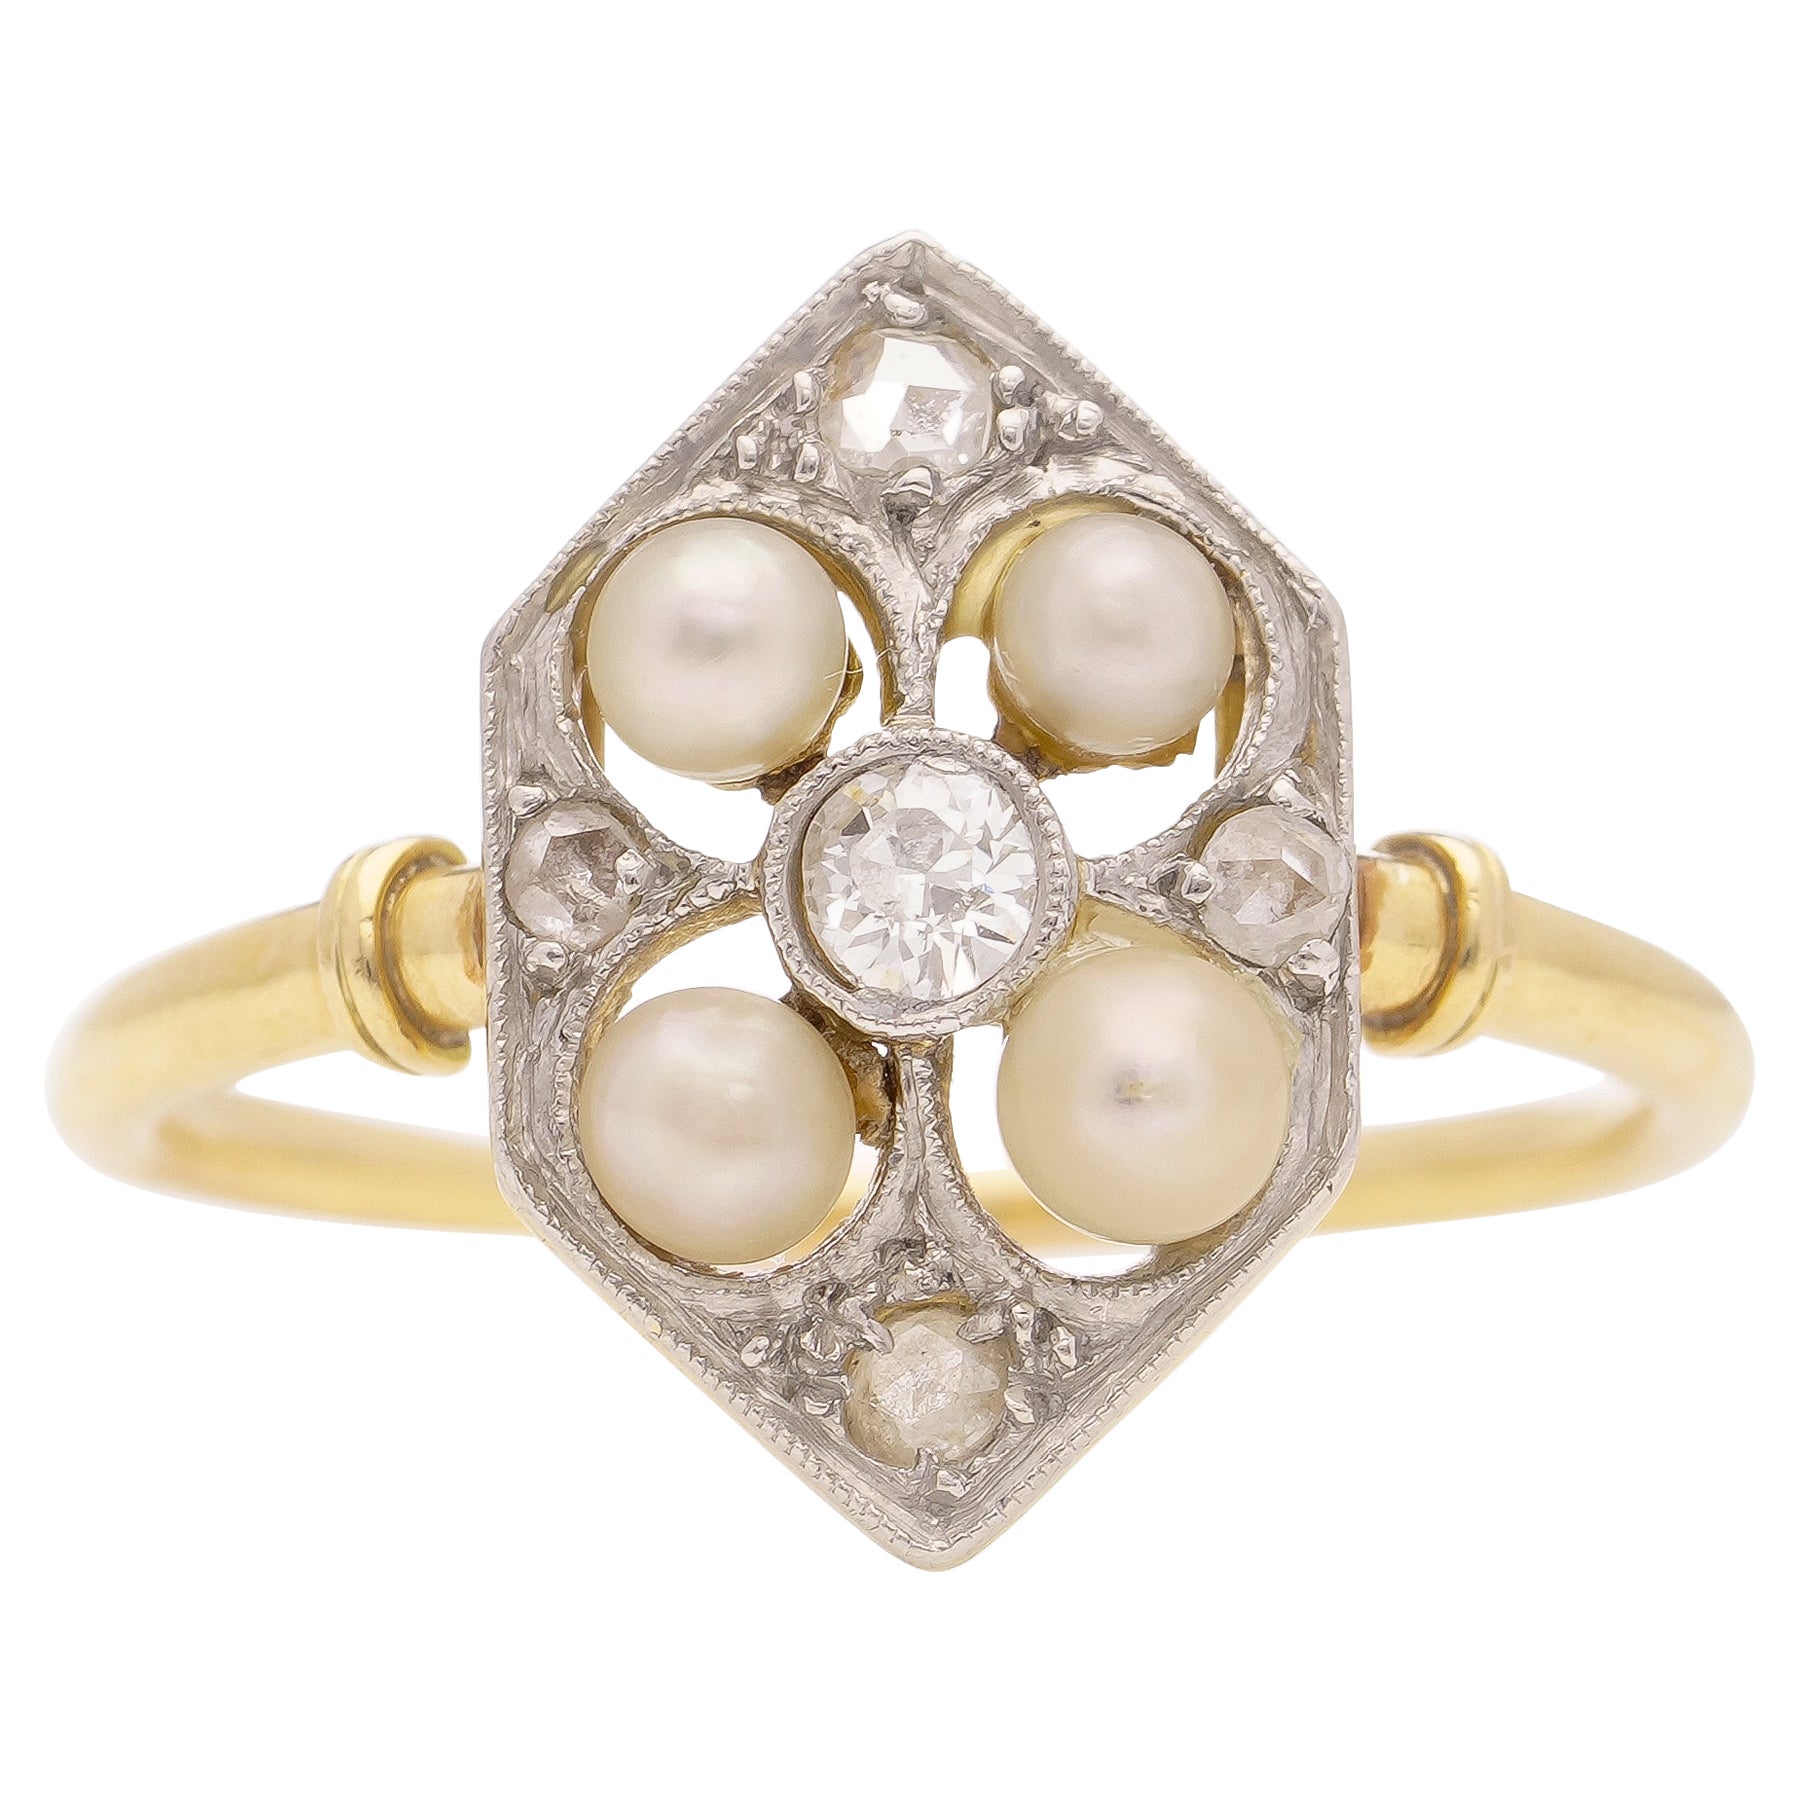 Edwardian 18kt yellow gold and platinum ladies' ring with diamonds and pearls 